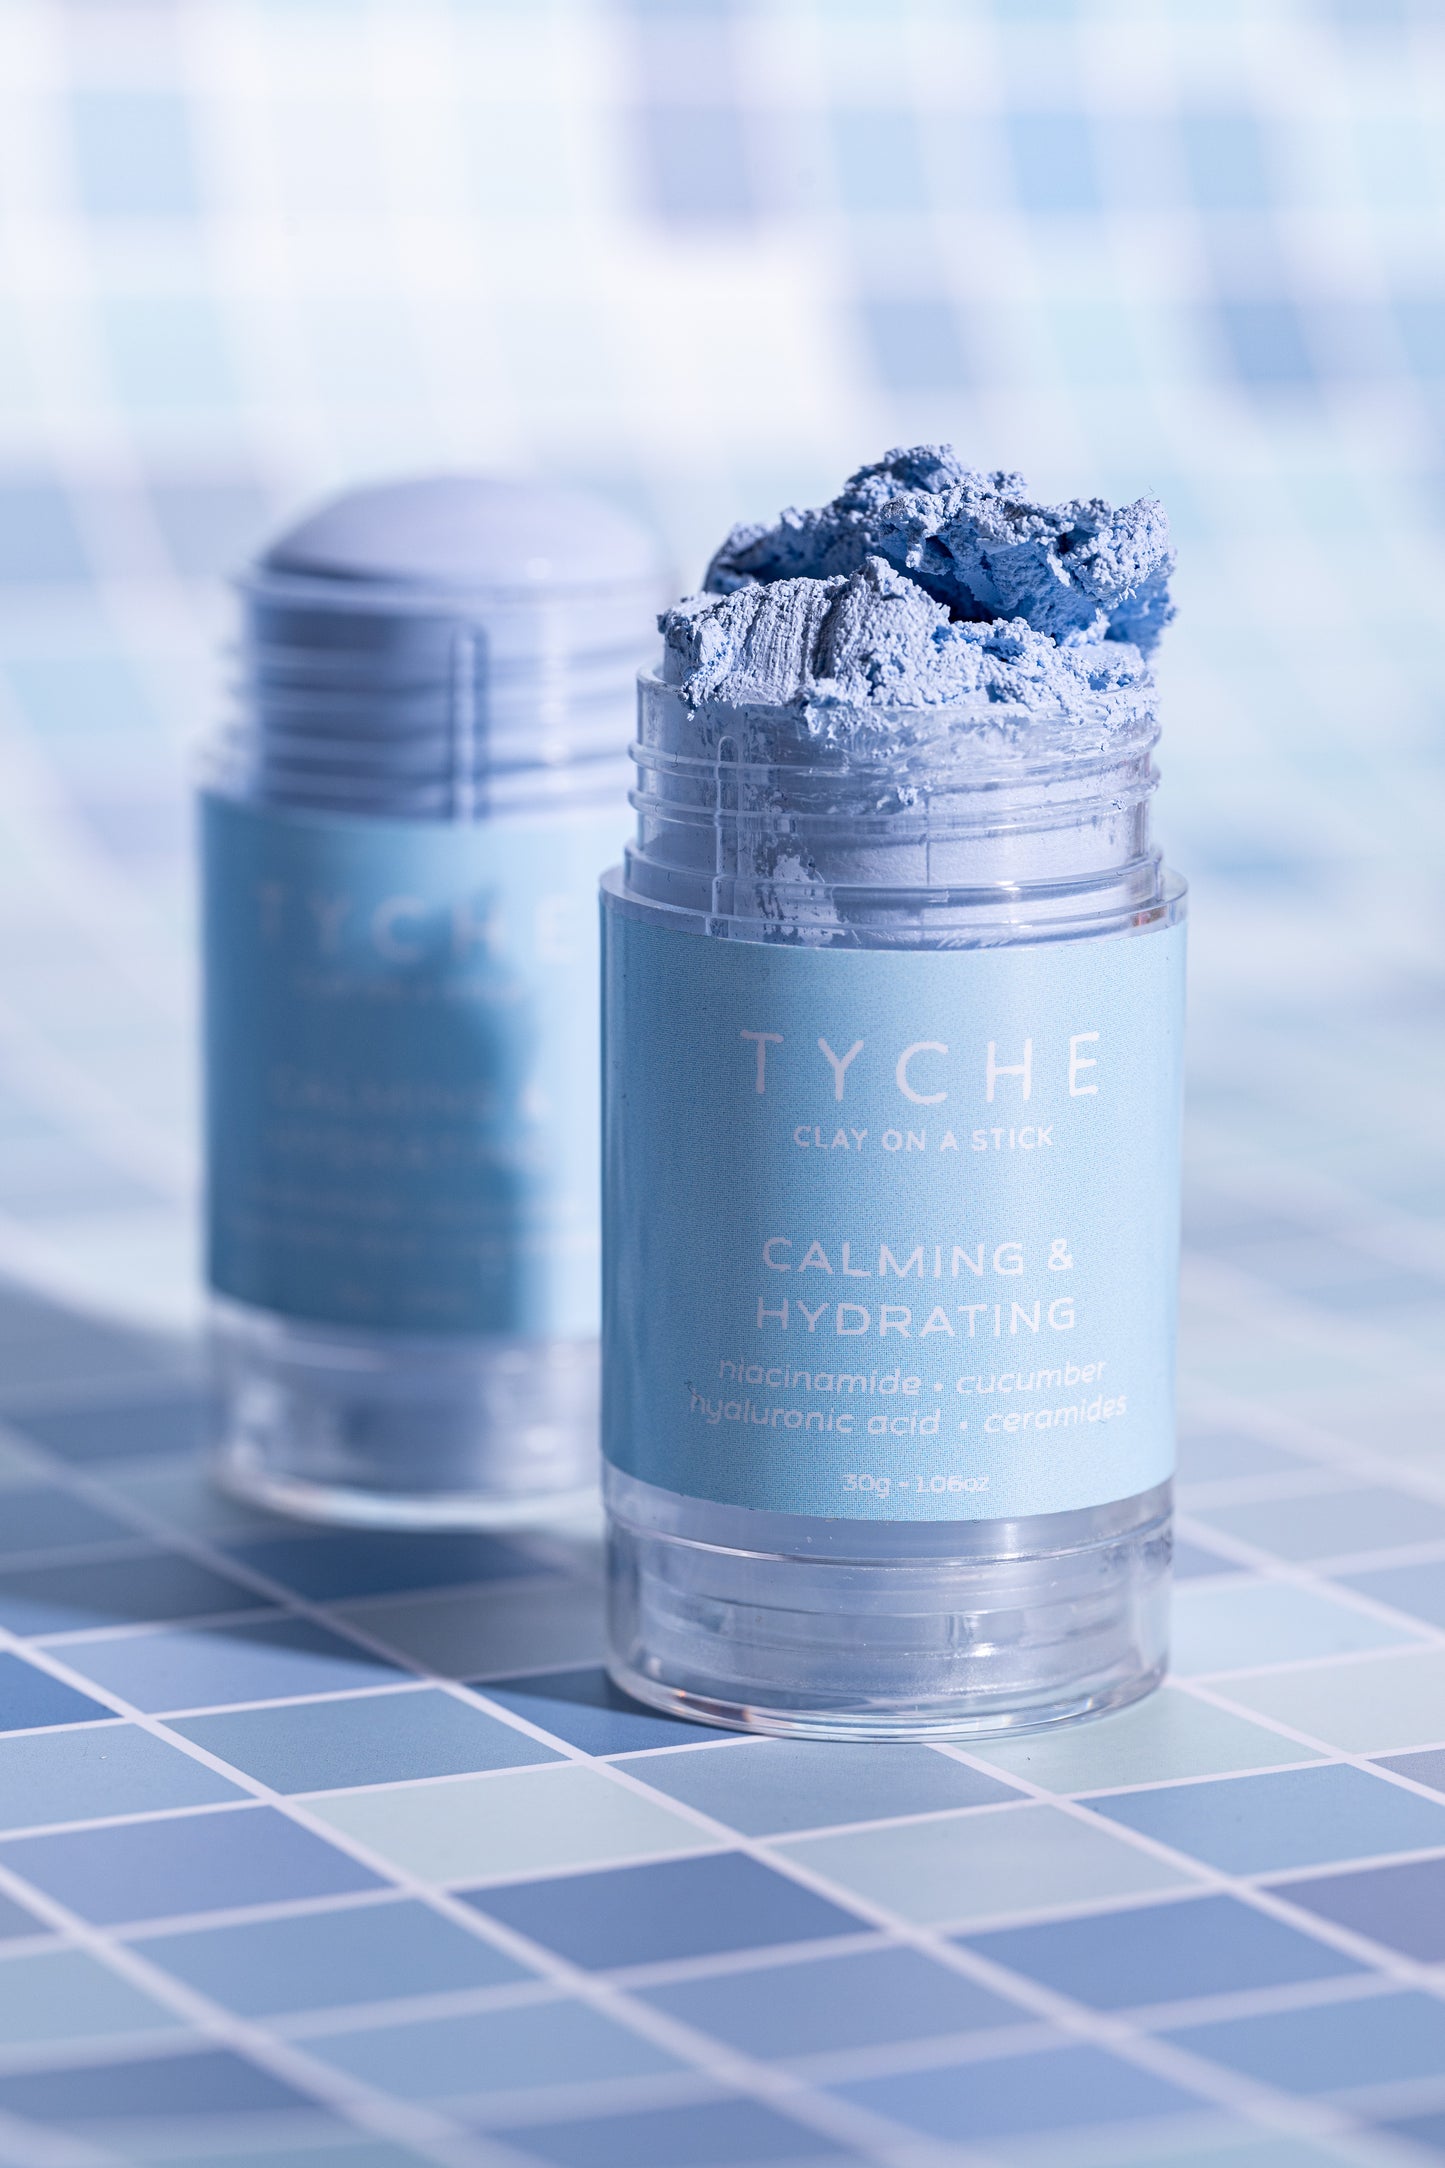 TYCHE CALMING & HYDRATING CLAY MASK STICK